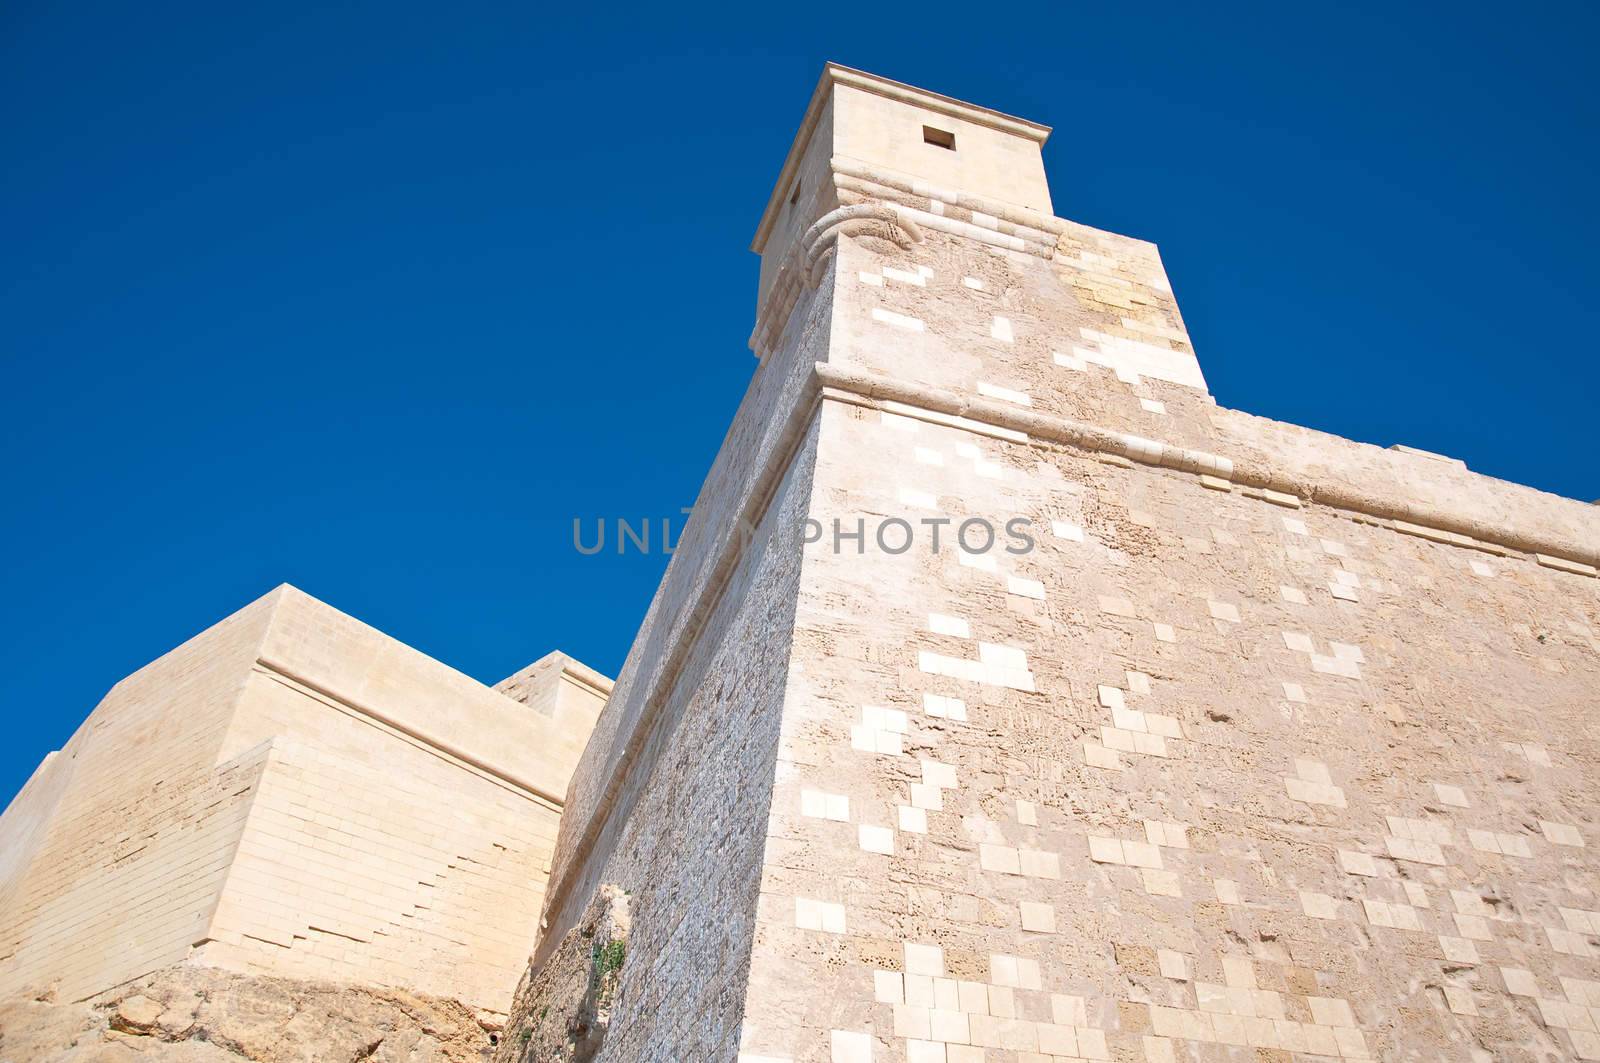 Especially with the clock of the castle of victoria, Rabat, Gozo, Malta,europe